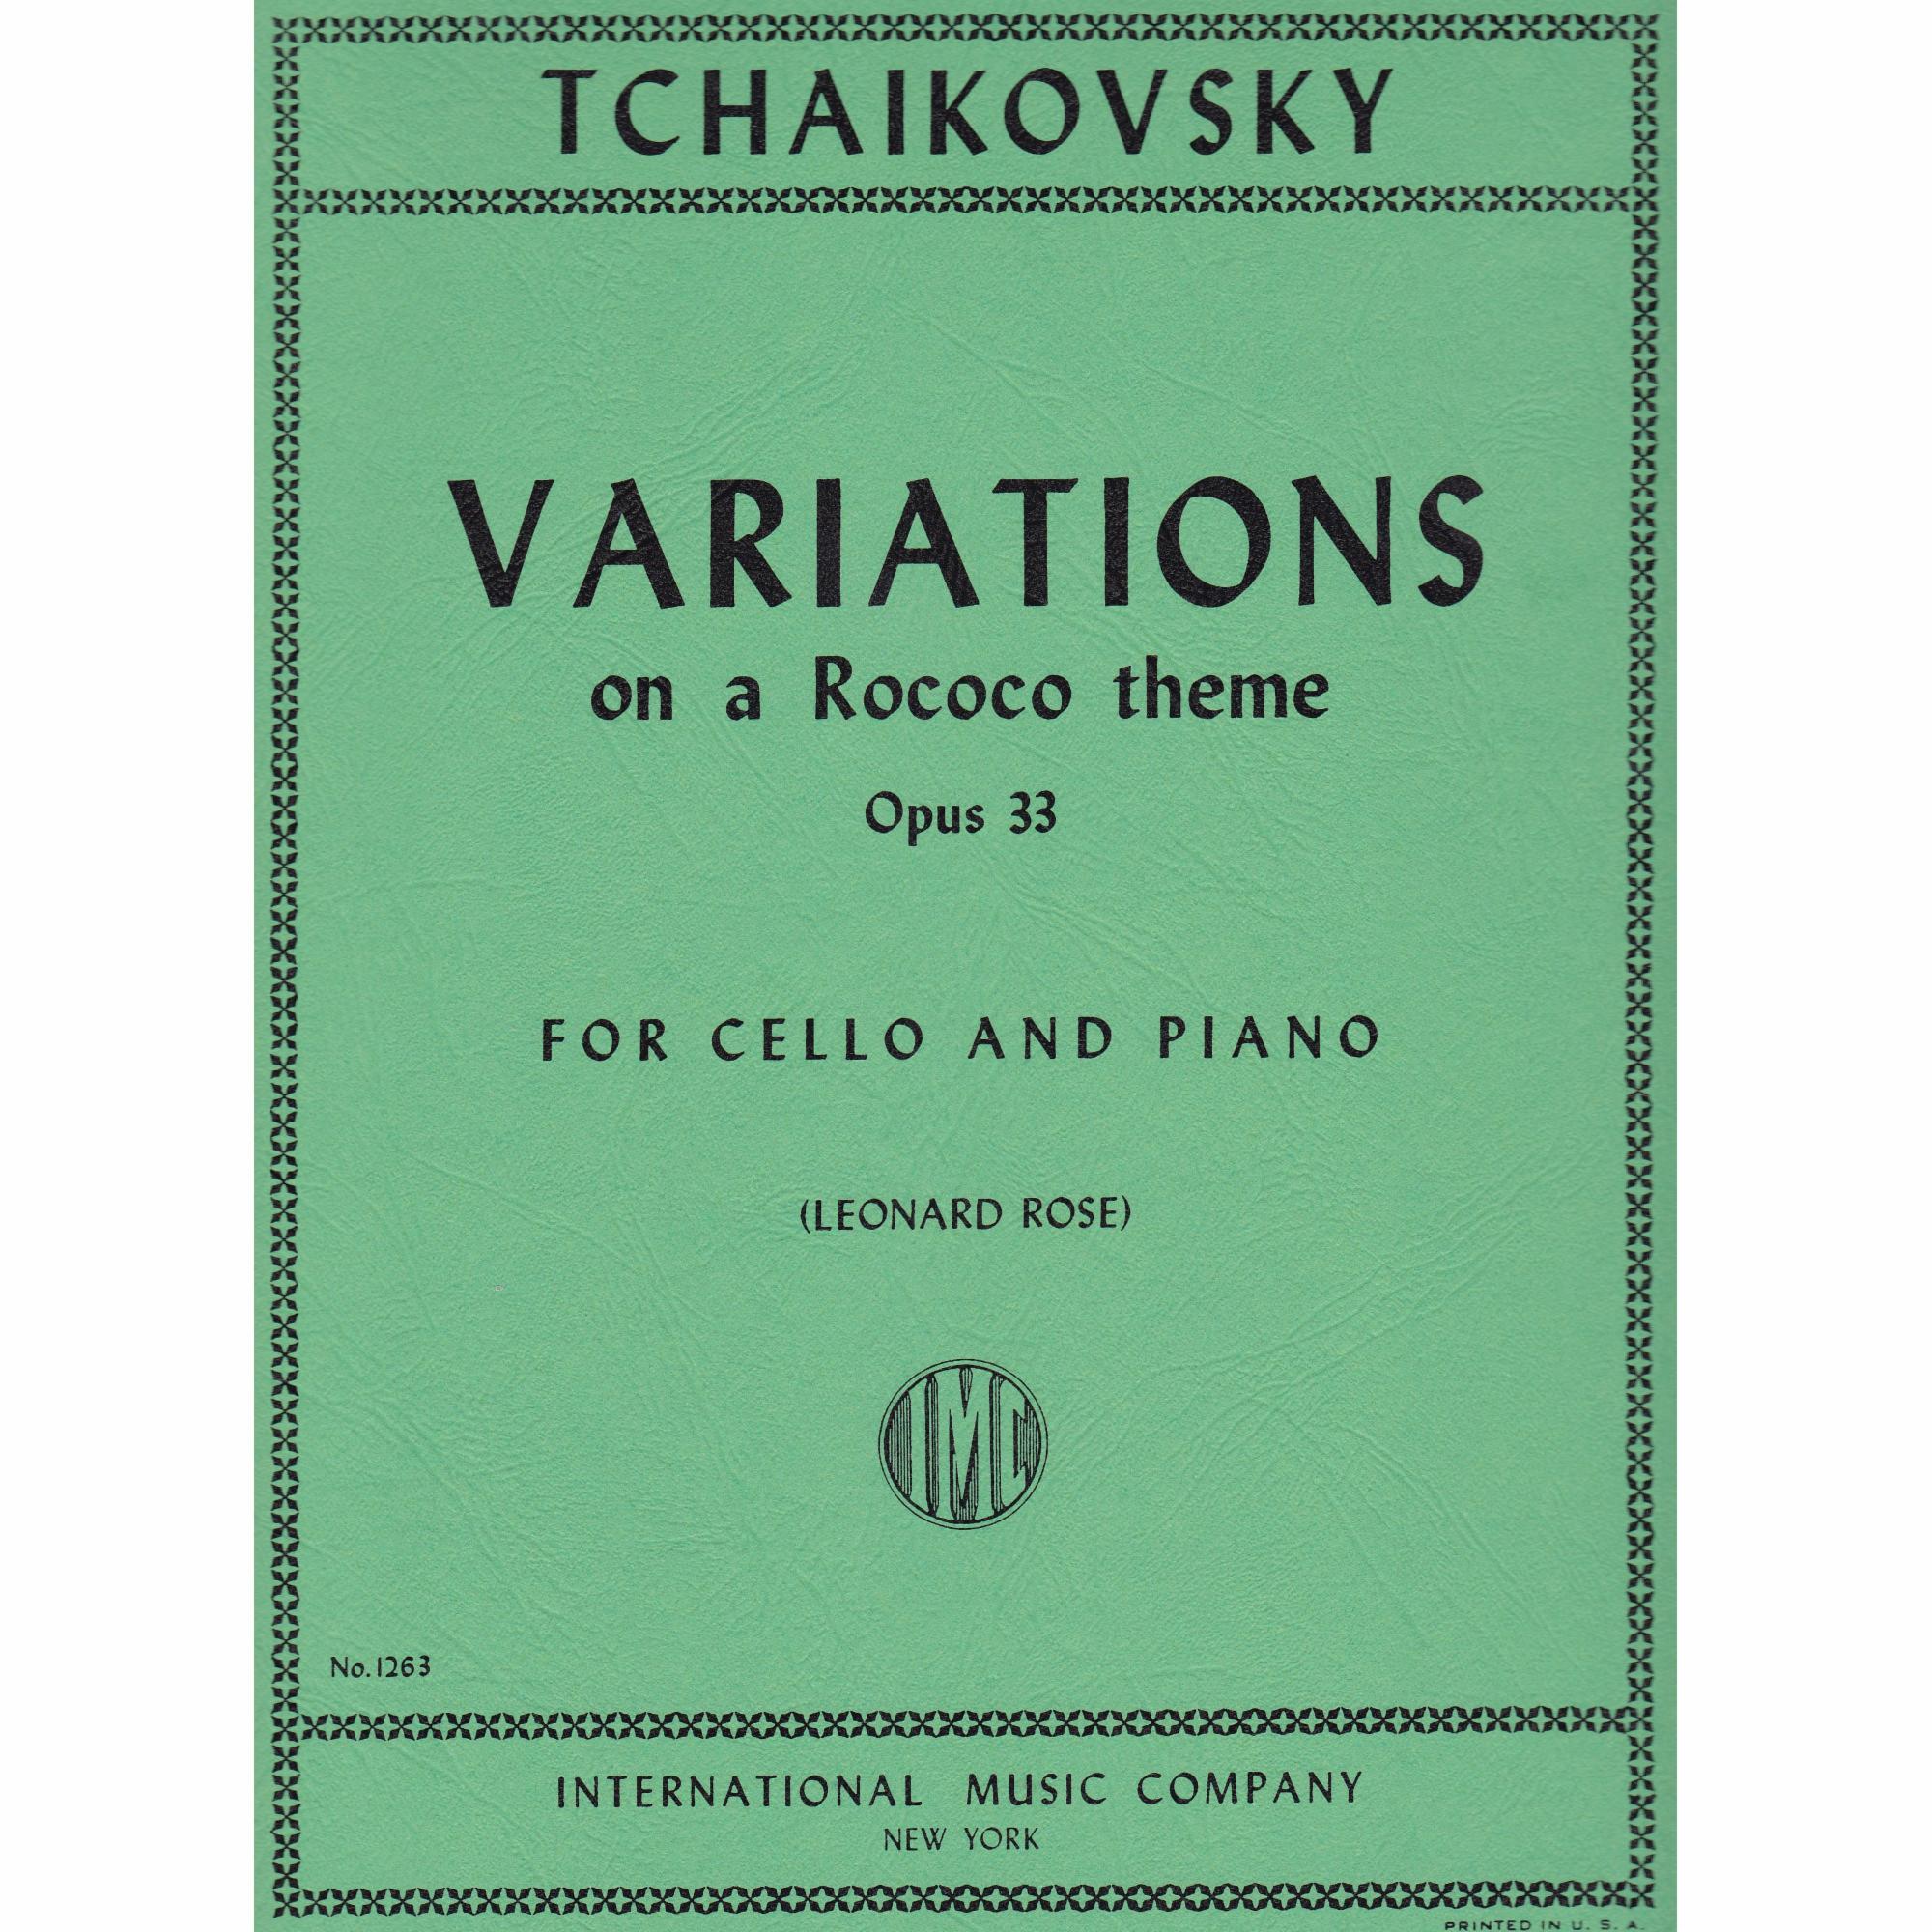 Variations on a Rococo Theme for Cello and Piano, Op. 33